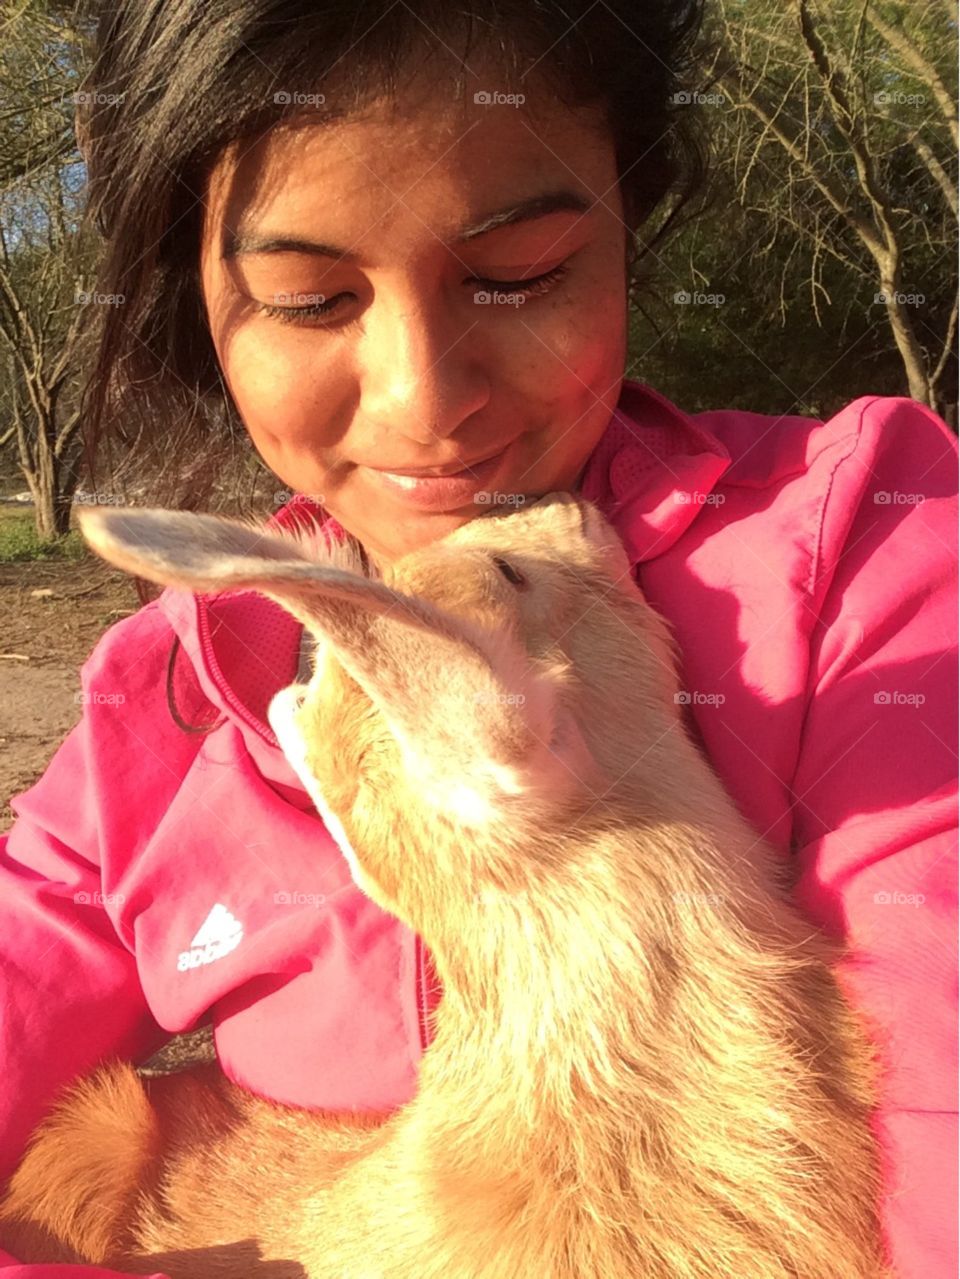 Close up of a young girl with dimples while she cradles a baby goat. Goat kid has a golden color & is lovingly looking up at the girl. The girl is looking down at the kid with a smile on her face. Set outdoors.